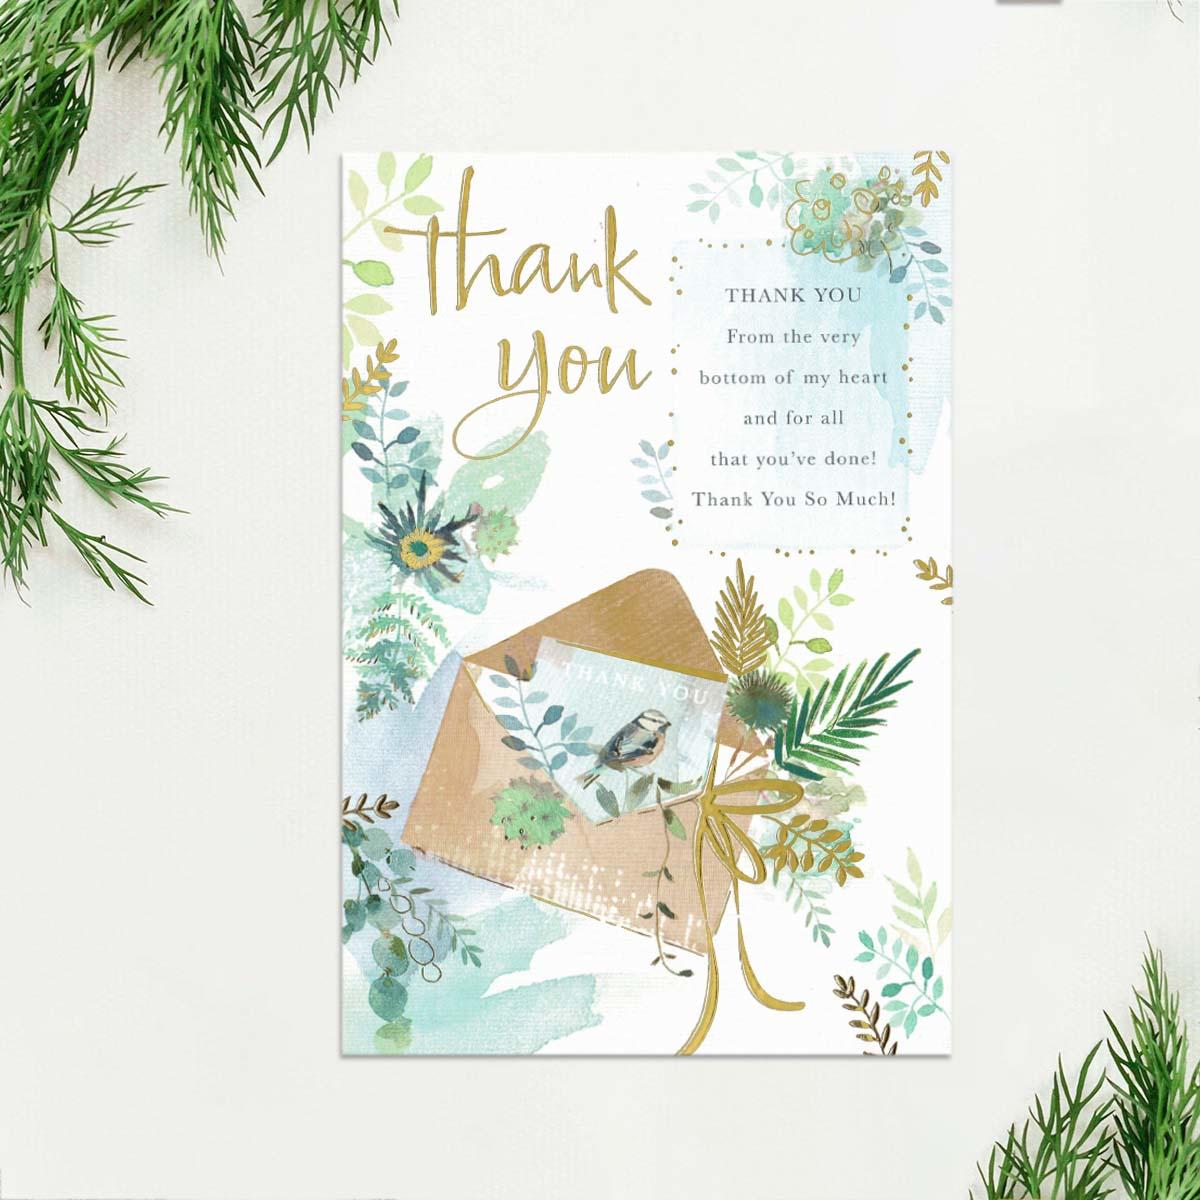 Thank You Floral Envelope Greeting Card Displayed In Full